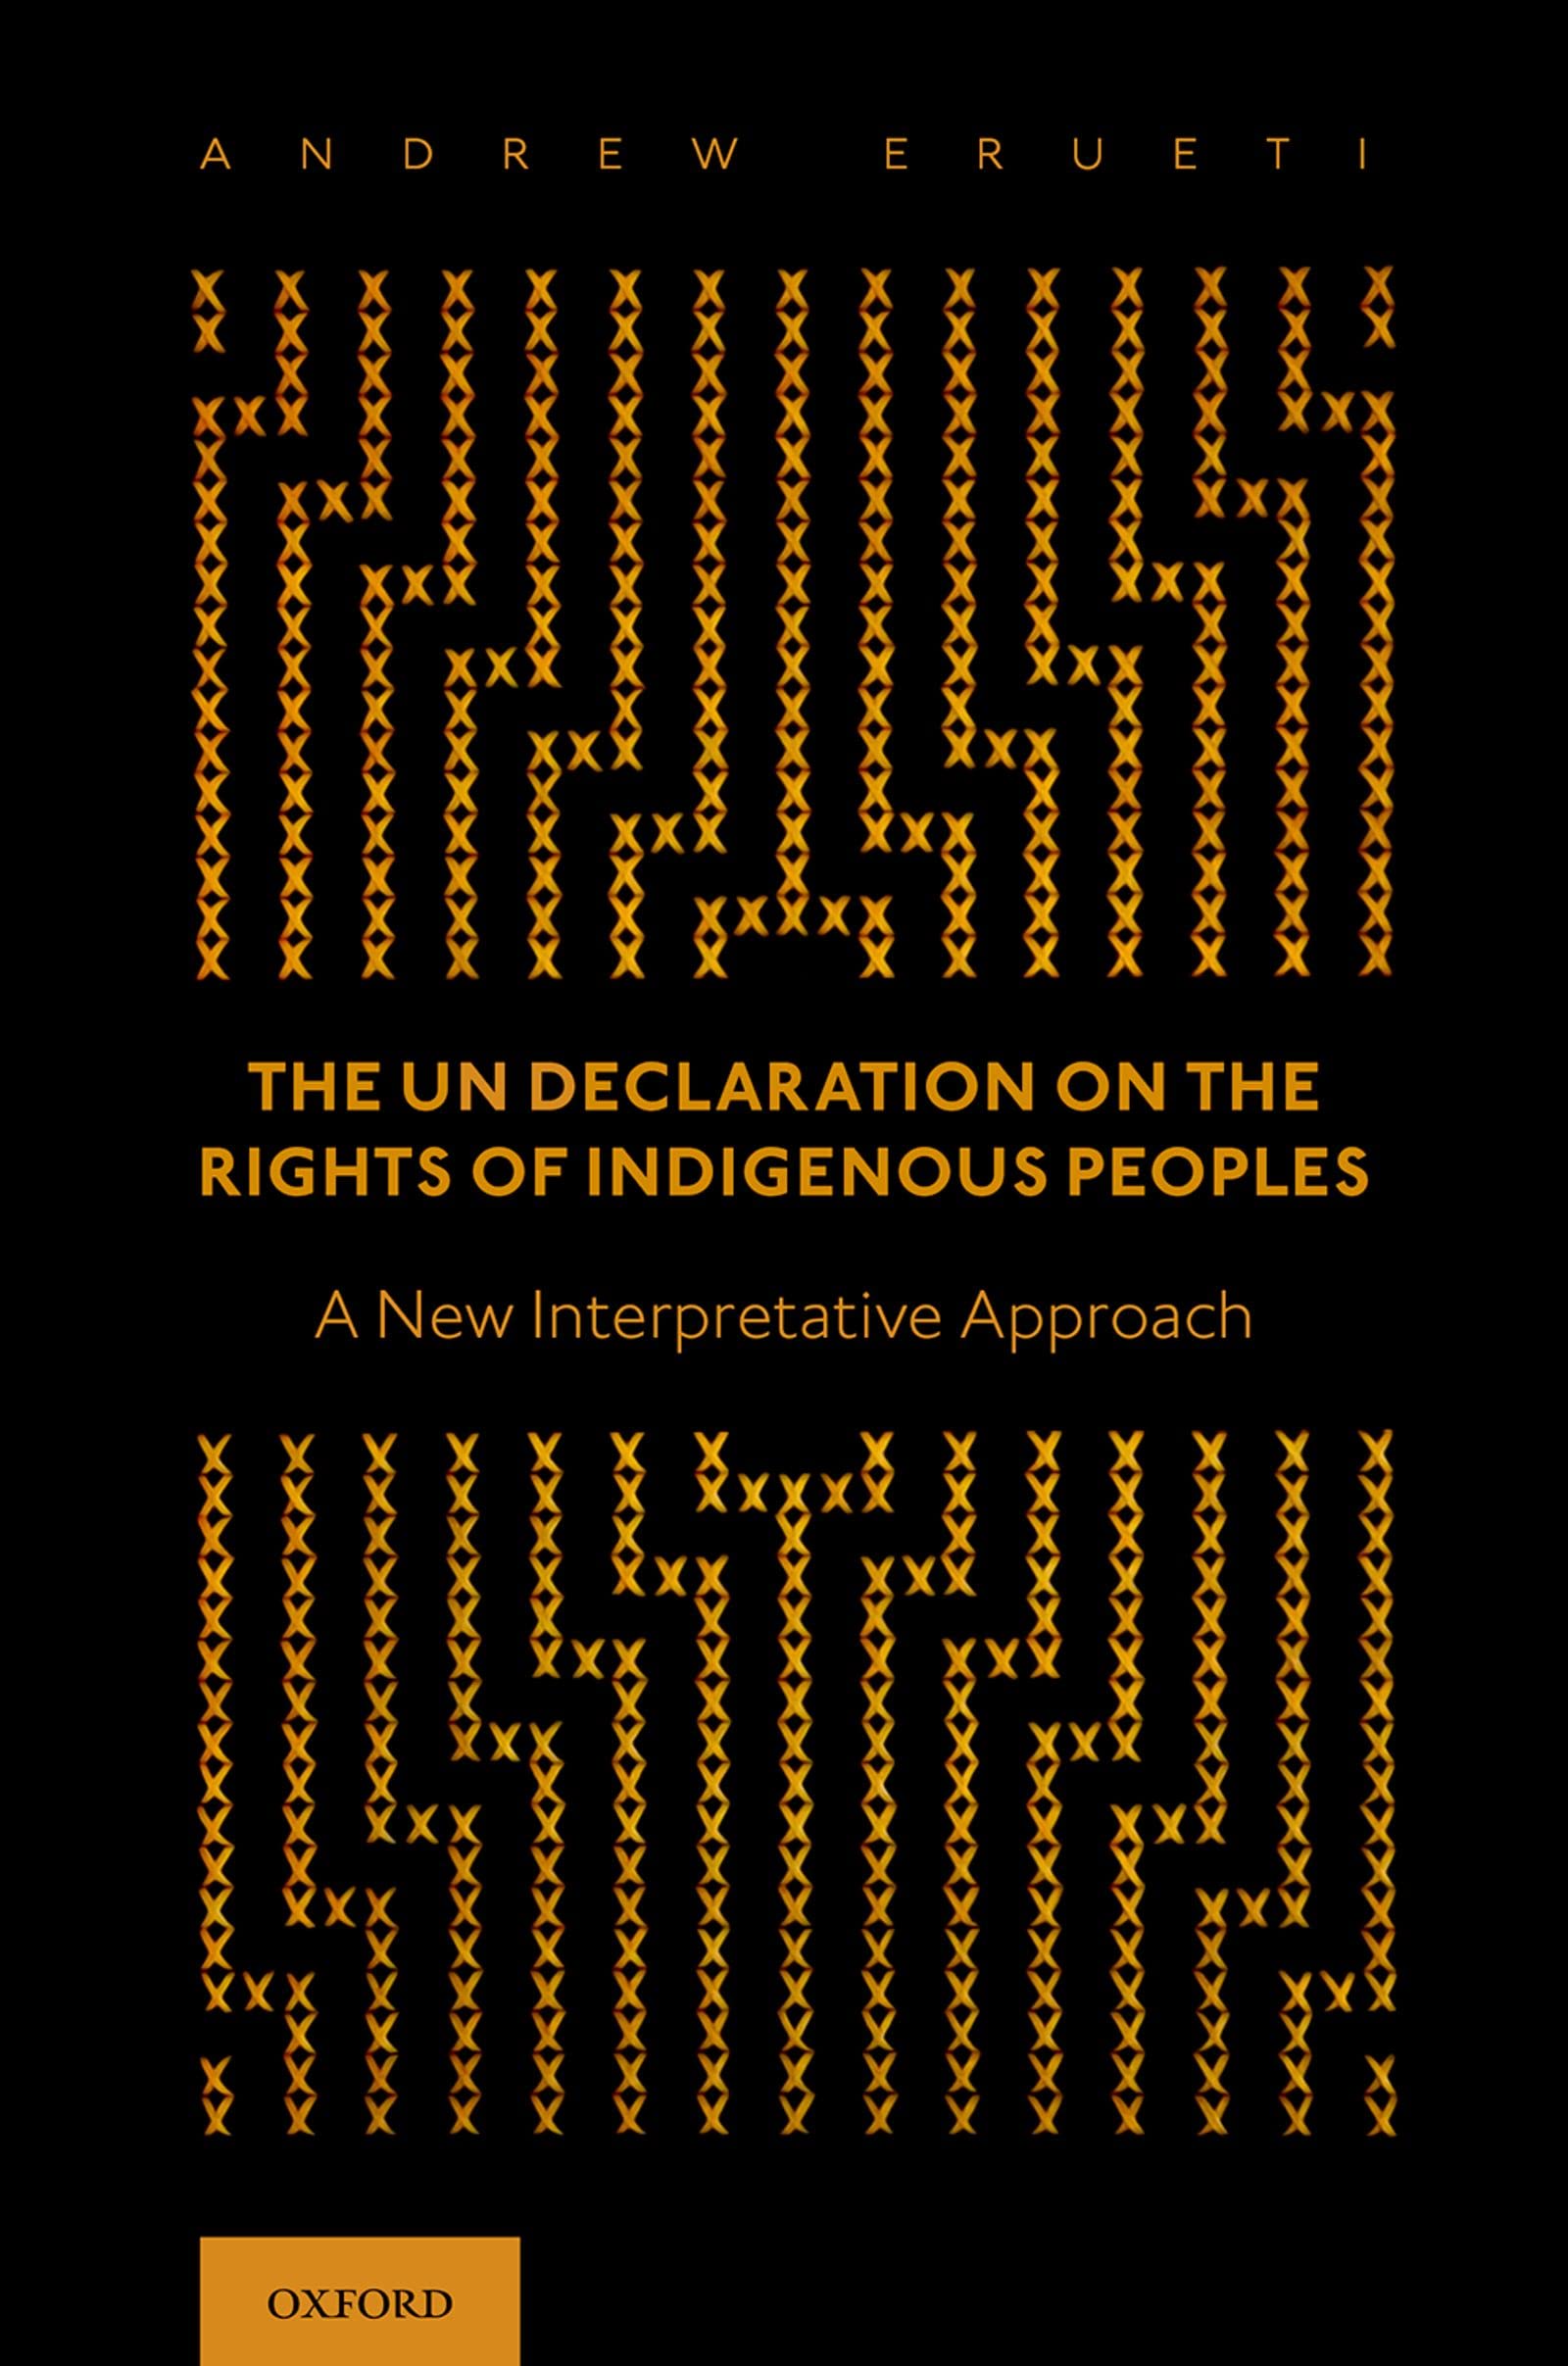 The UN Declaration on the Rights of Indigenous Peoples: A New Interpretative Approach